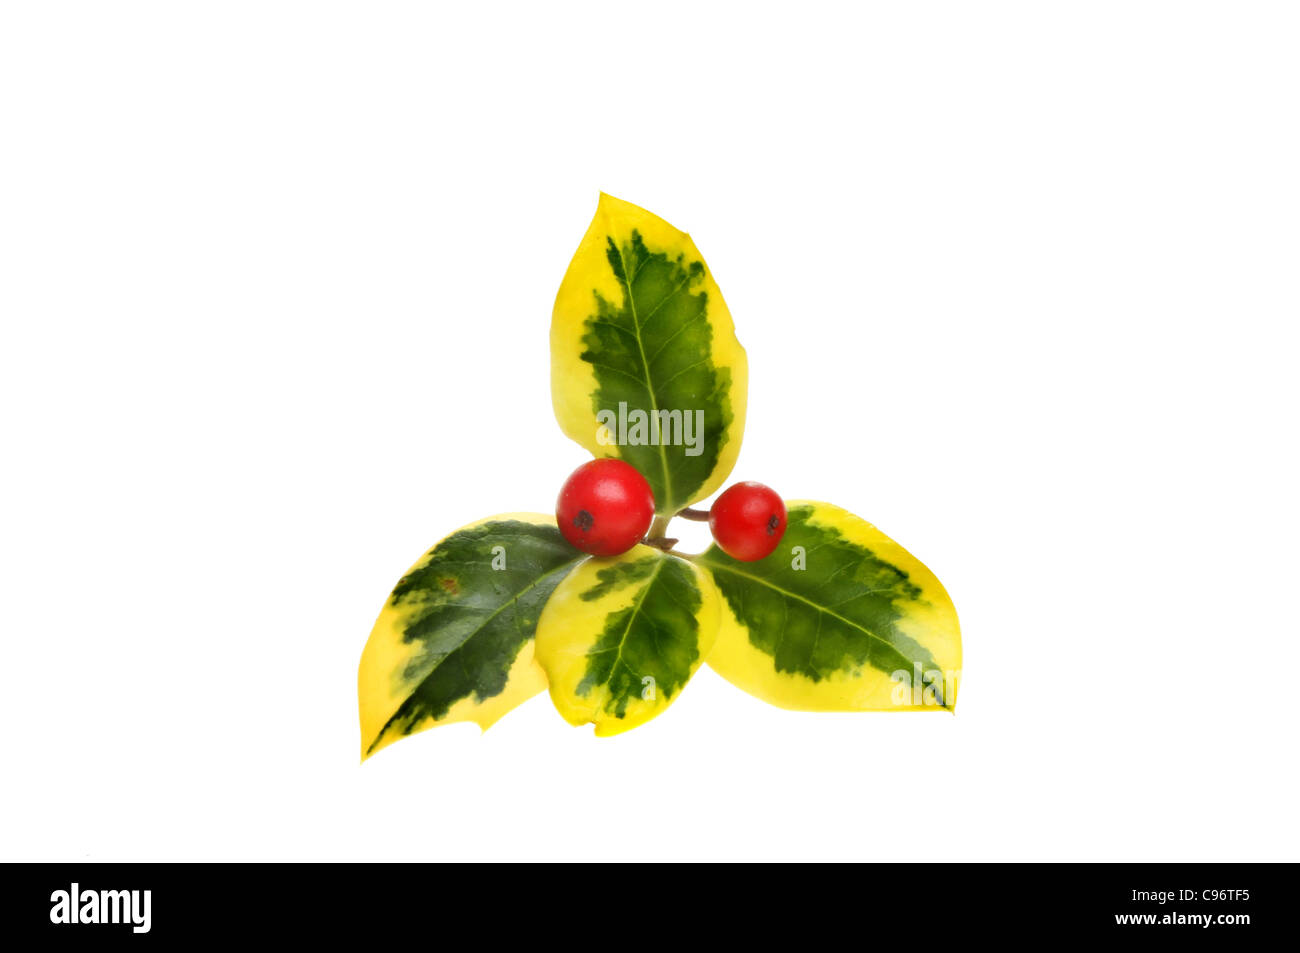 Sprig of variegated holly with red ripe berries isolated against white Stock Photo